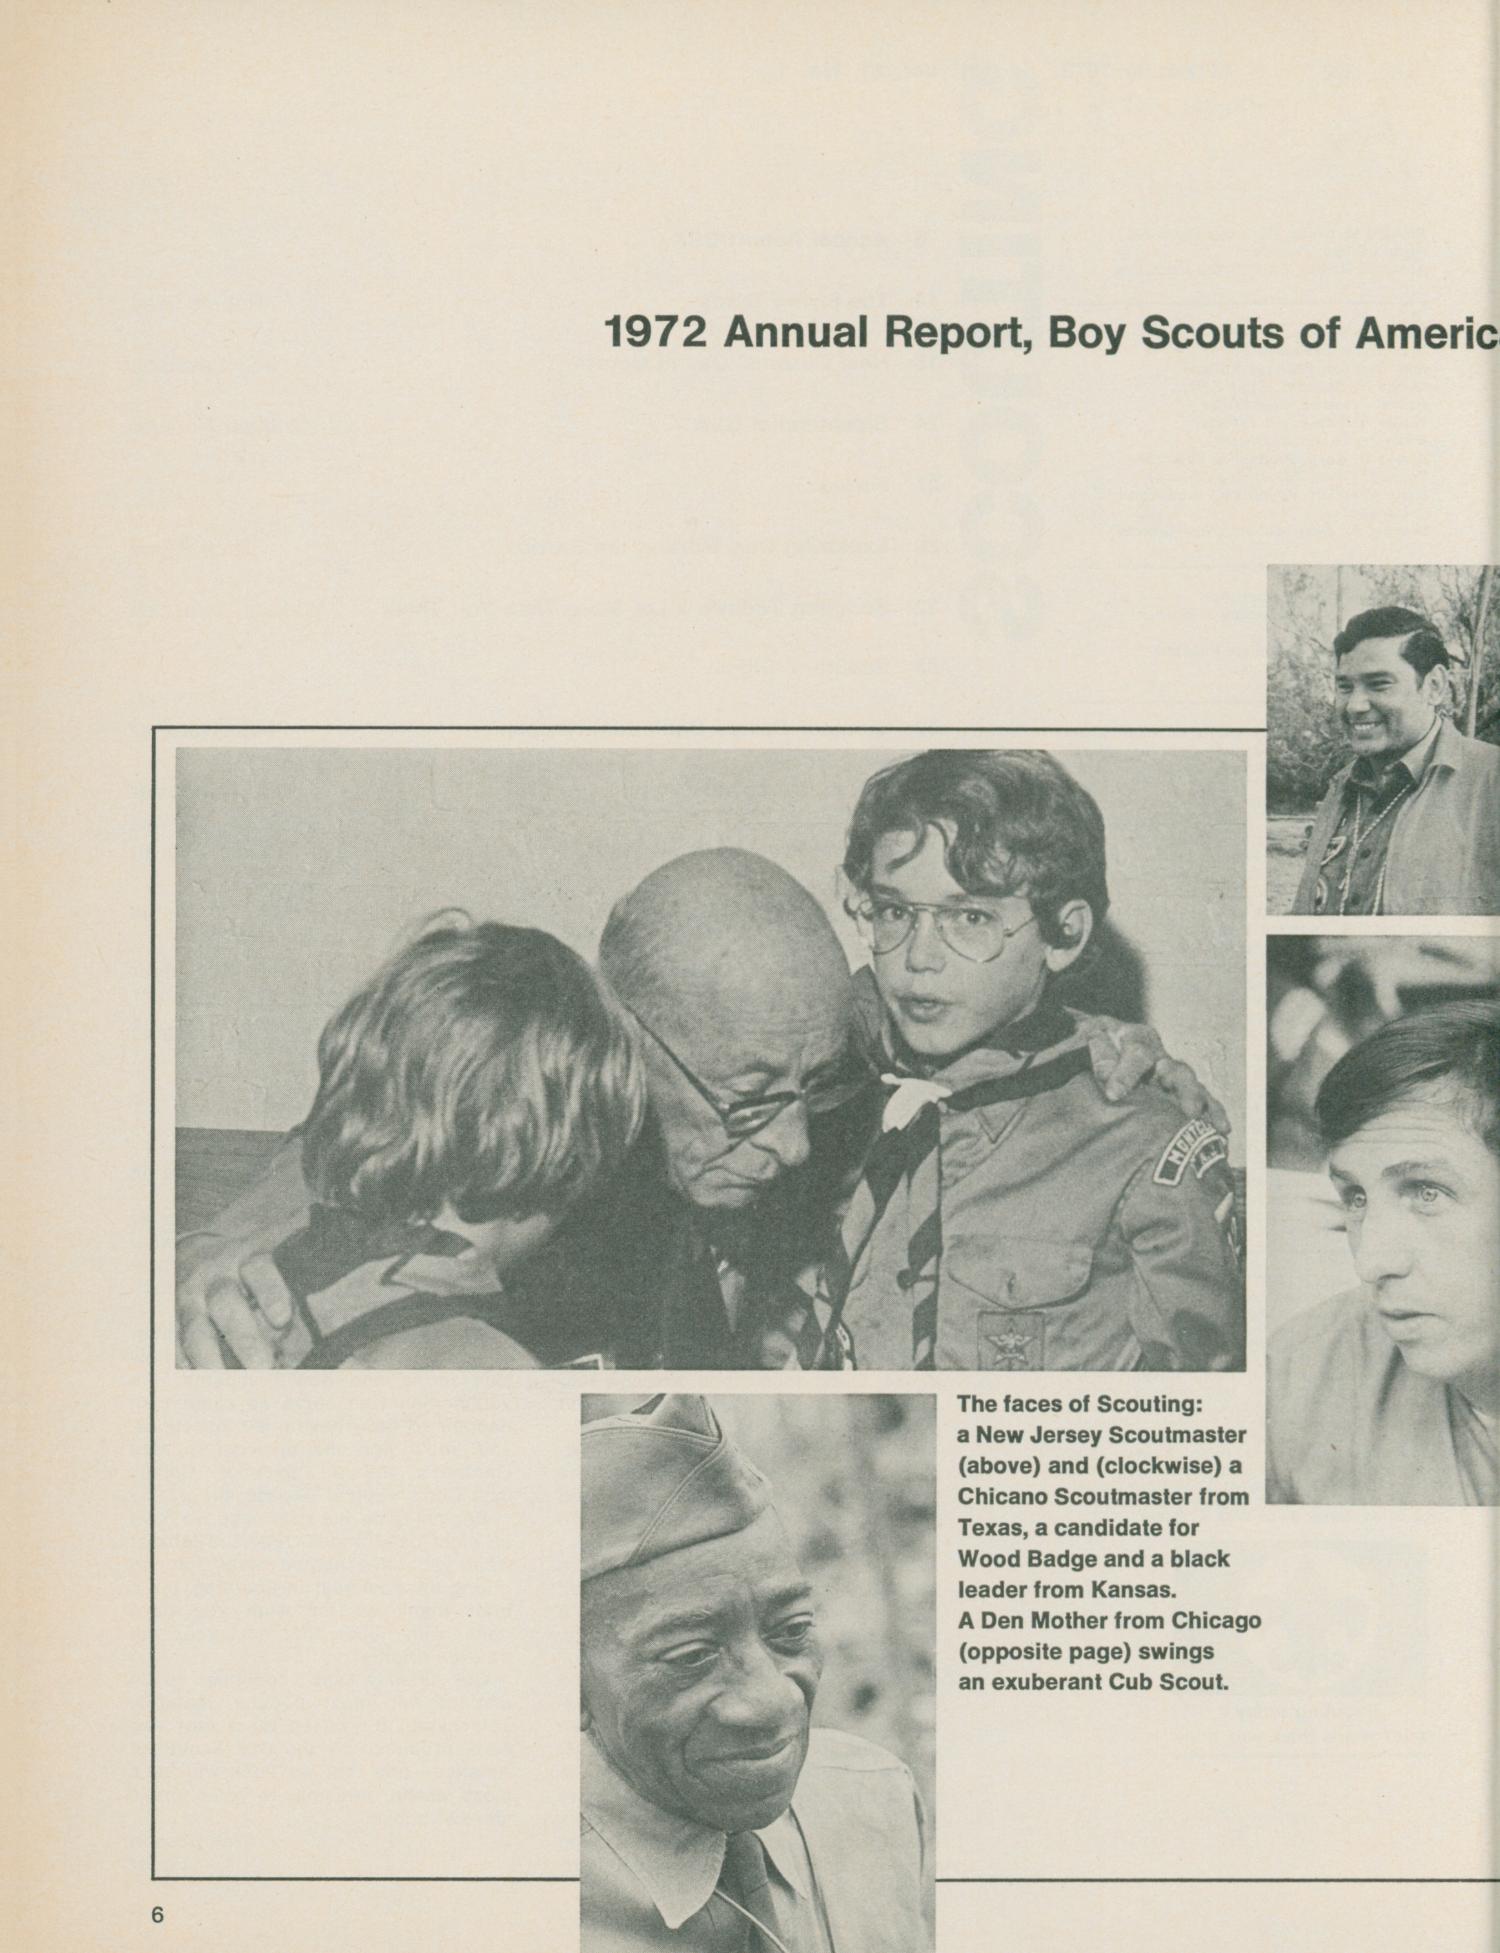 Scouting, Volume 61, Number 4, May-June 1973
                                                
                                                    6
                                                